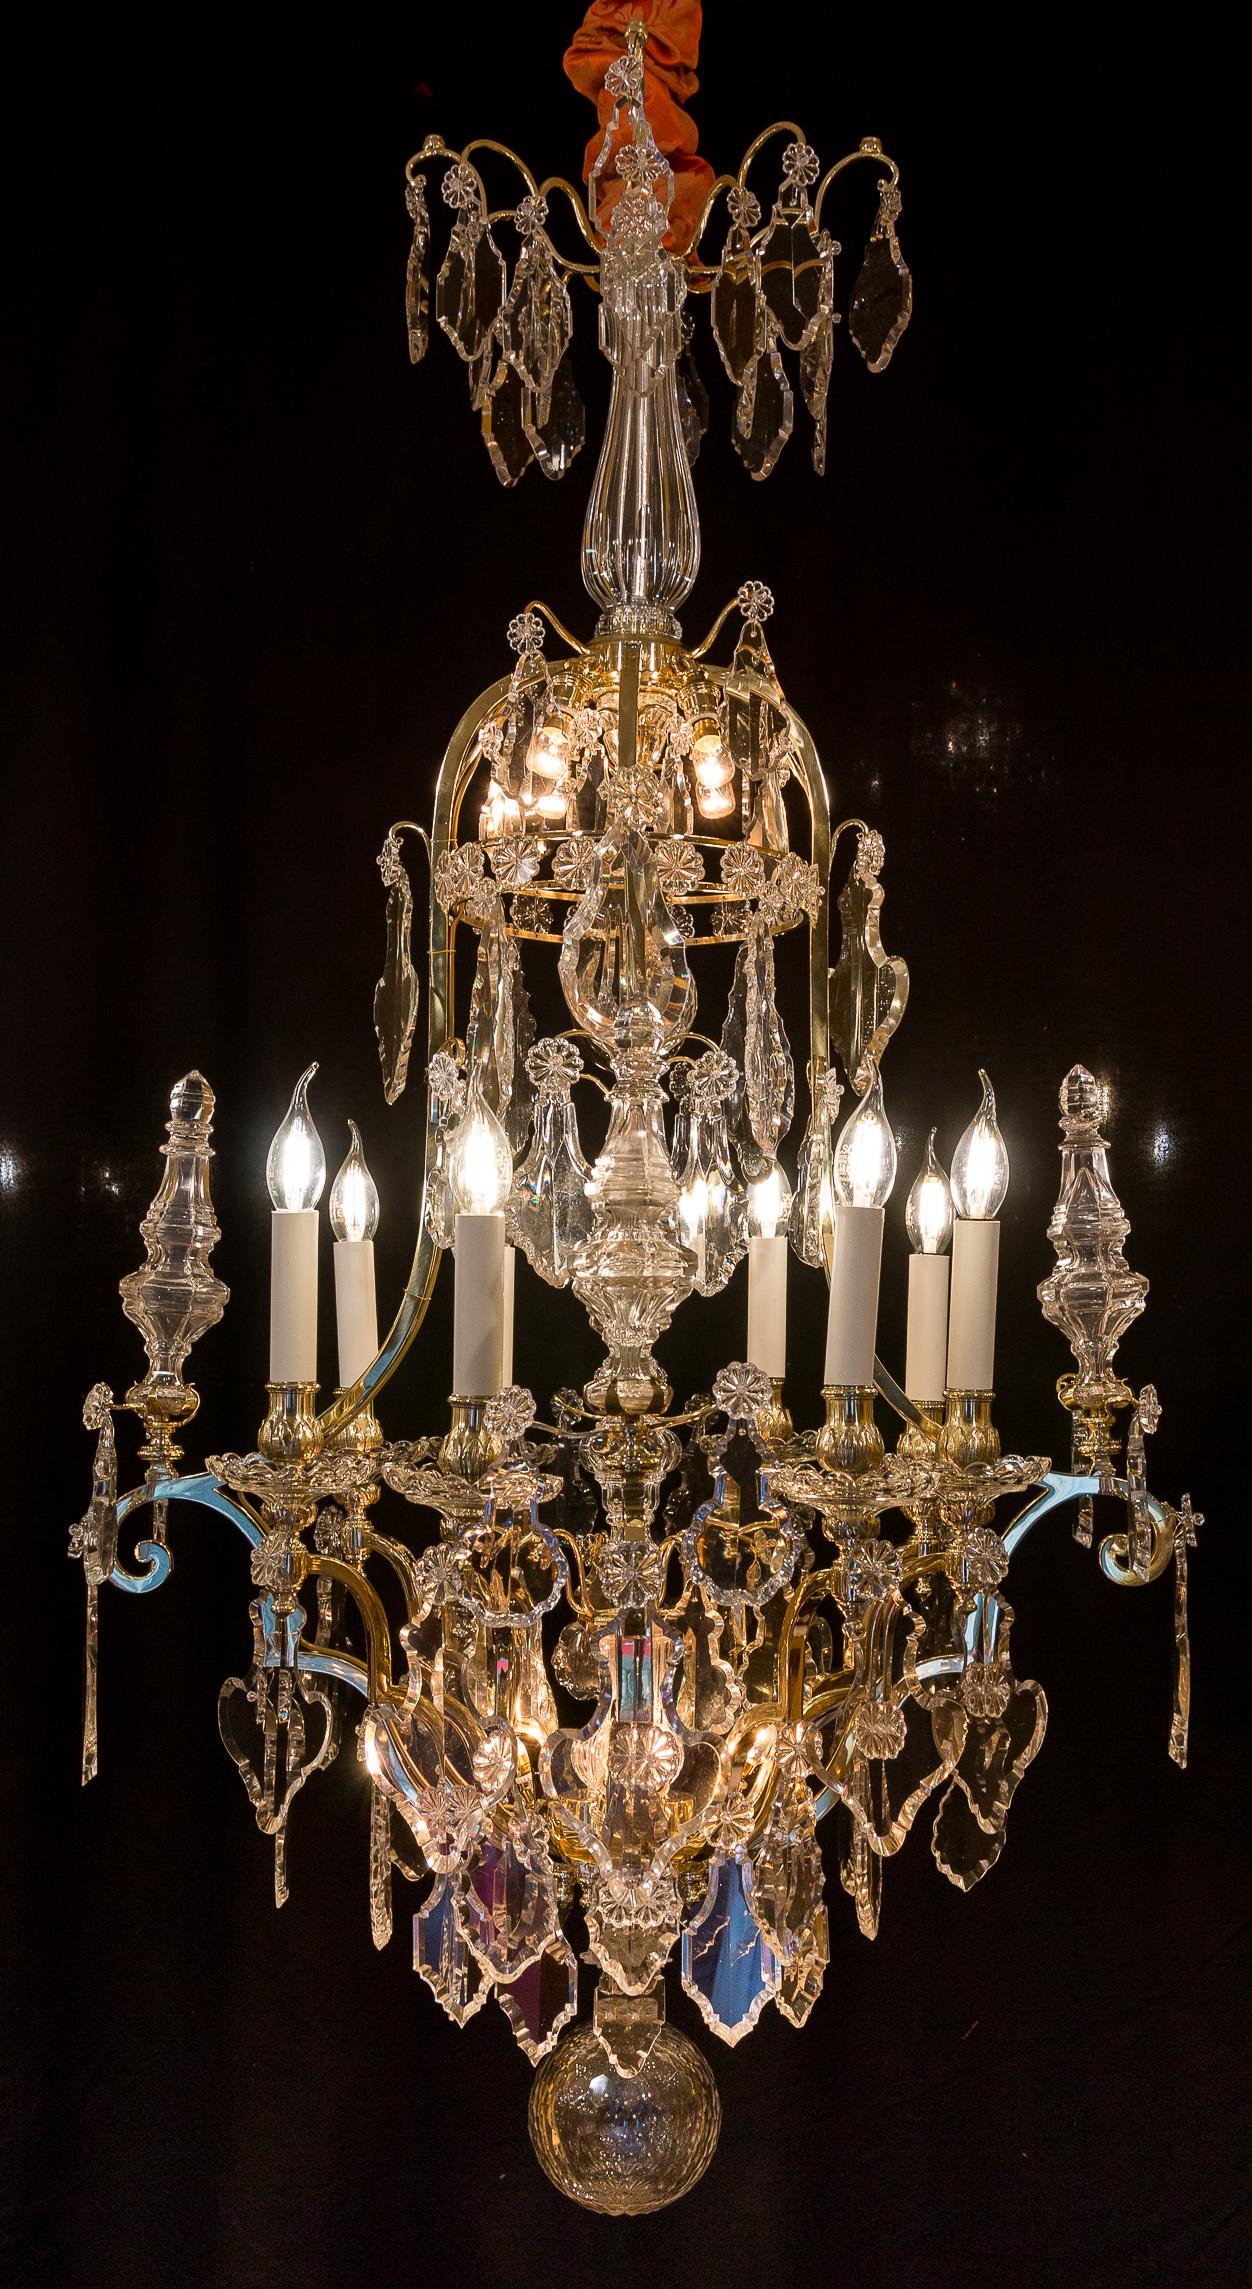 Sign by The Cristalleries De Baccarat, French Louis XIV style, gilt bronze and cut-crystal chandelier, circa 1880-1890.

A large beautiful gilt bronze and handcut crystal, chandelier in the Classic Louis XIV style. 
Our chandelier is composed of